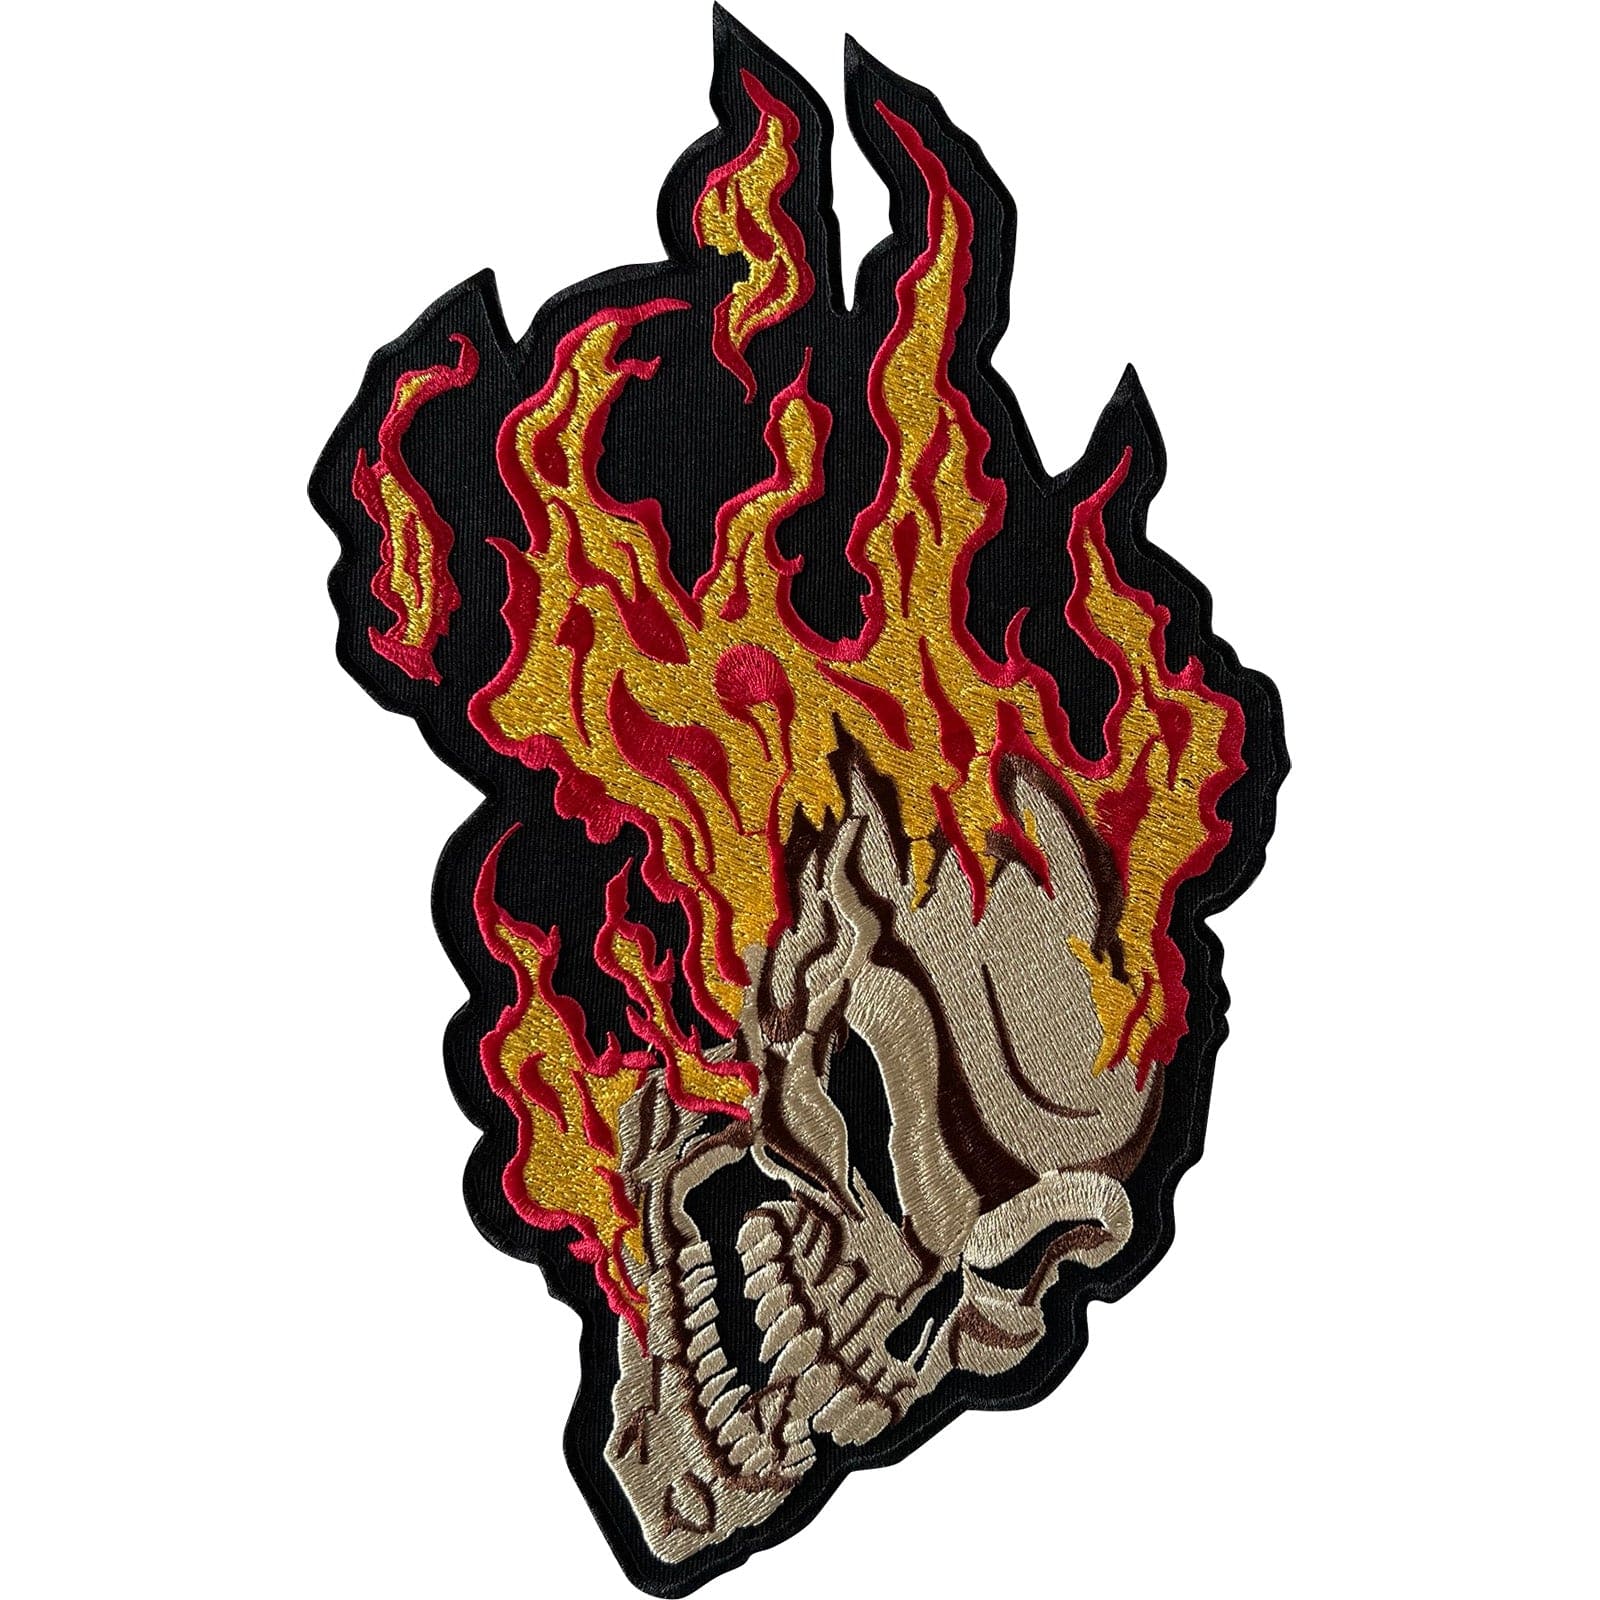 Big Large Flaming Skull Patch Iron Sew On Leather Denim Jacket Embroidered Badge